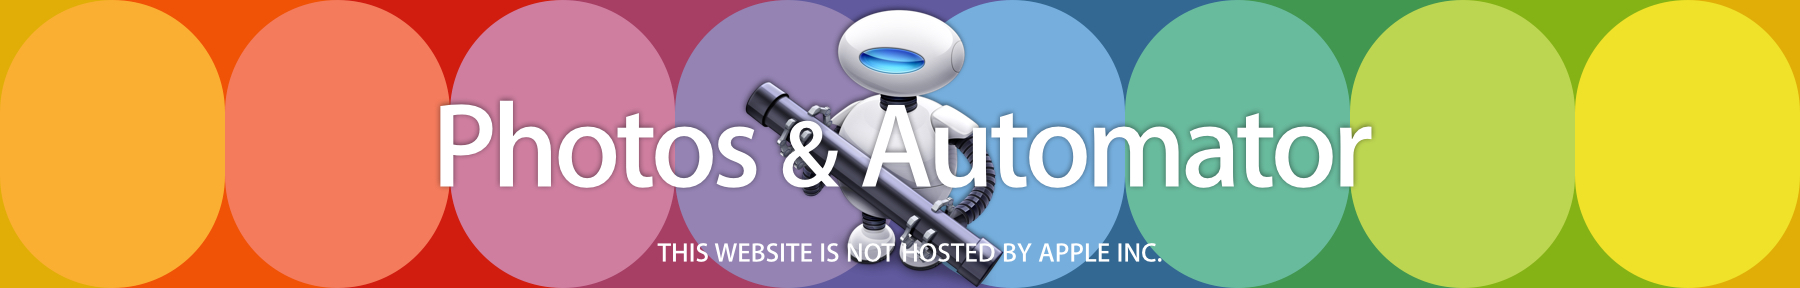 photos-automation-banner